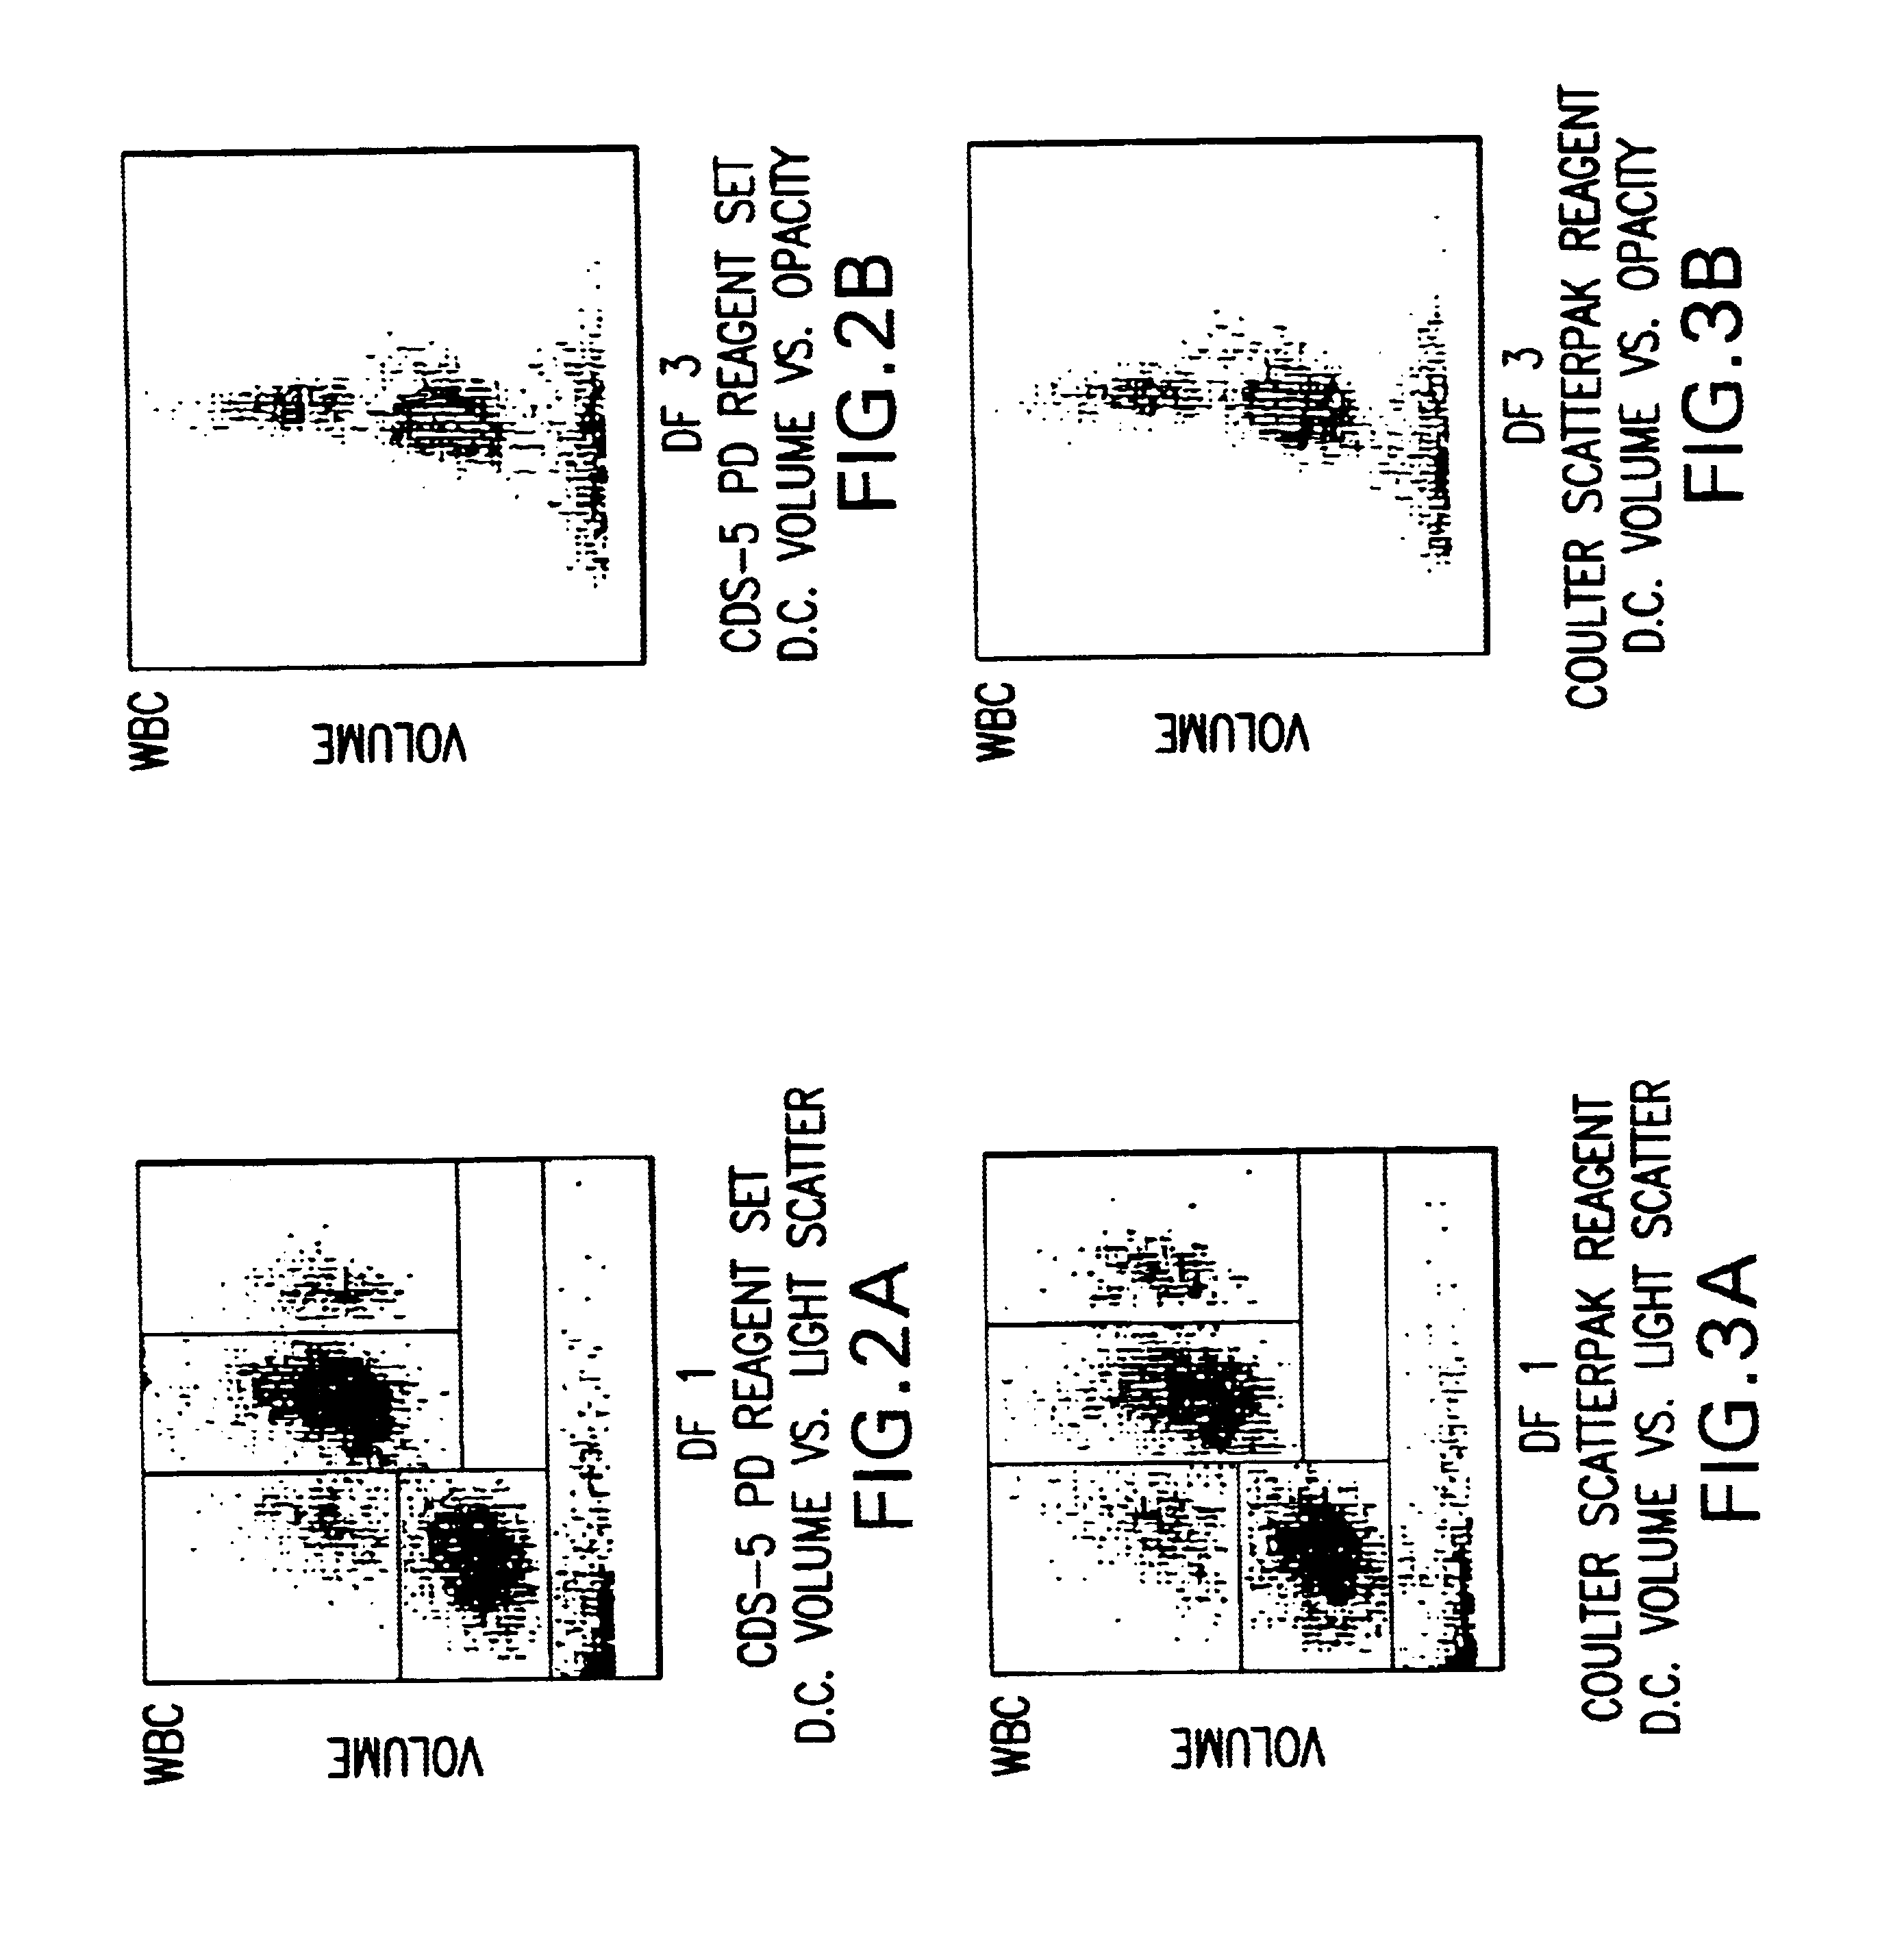 Multi-purpose reagent system and method for enumeration of red blood cells, white blood cells and thrombocytes and differential determination of white blood cells